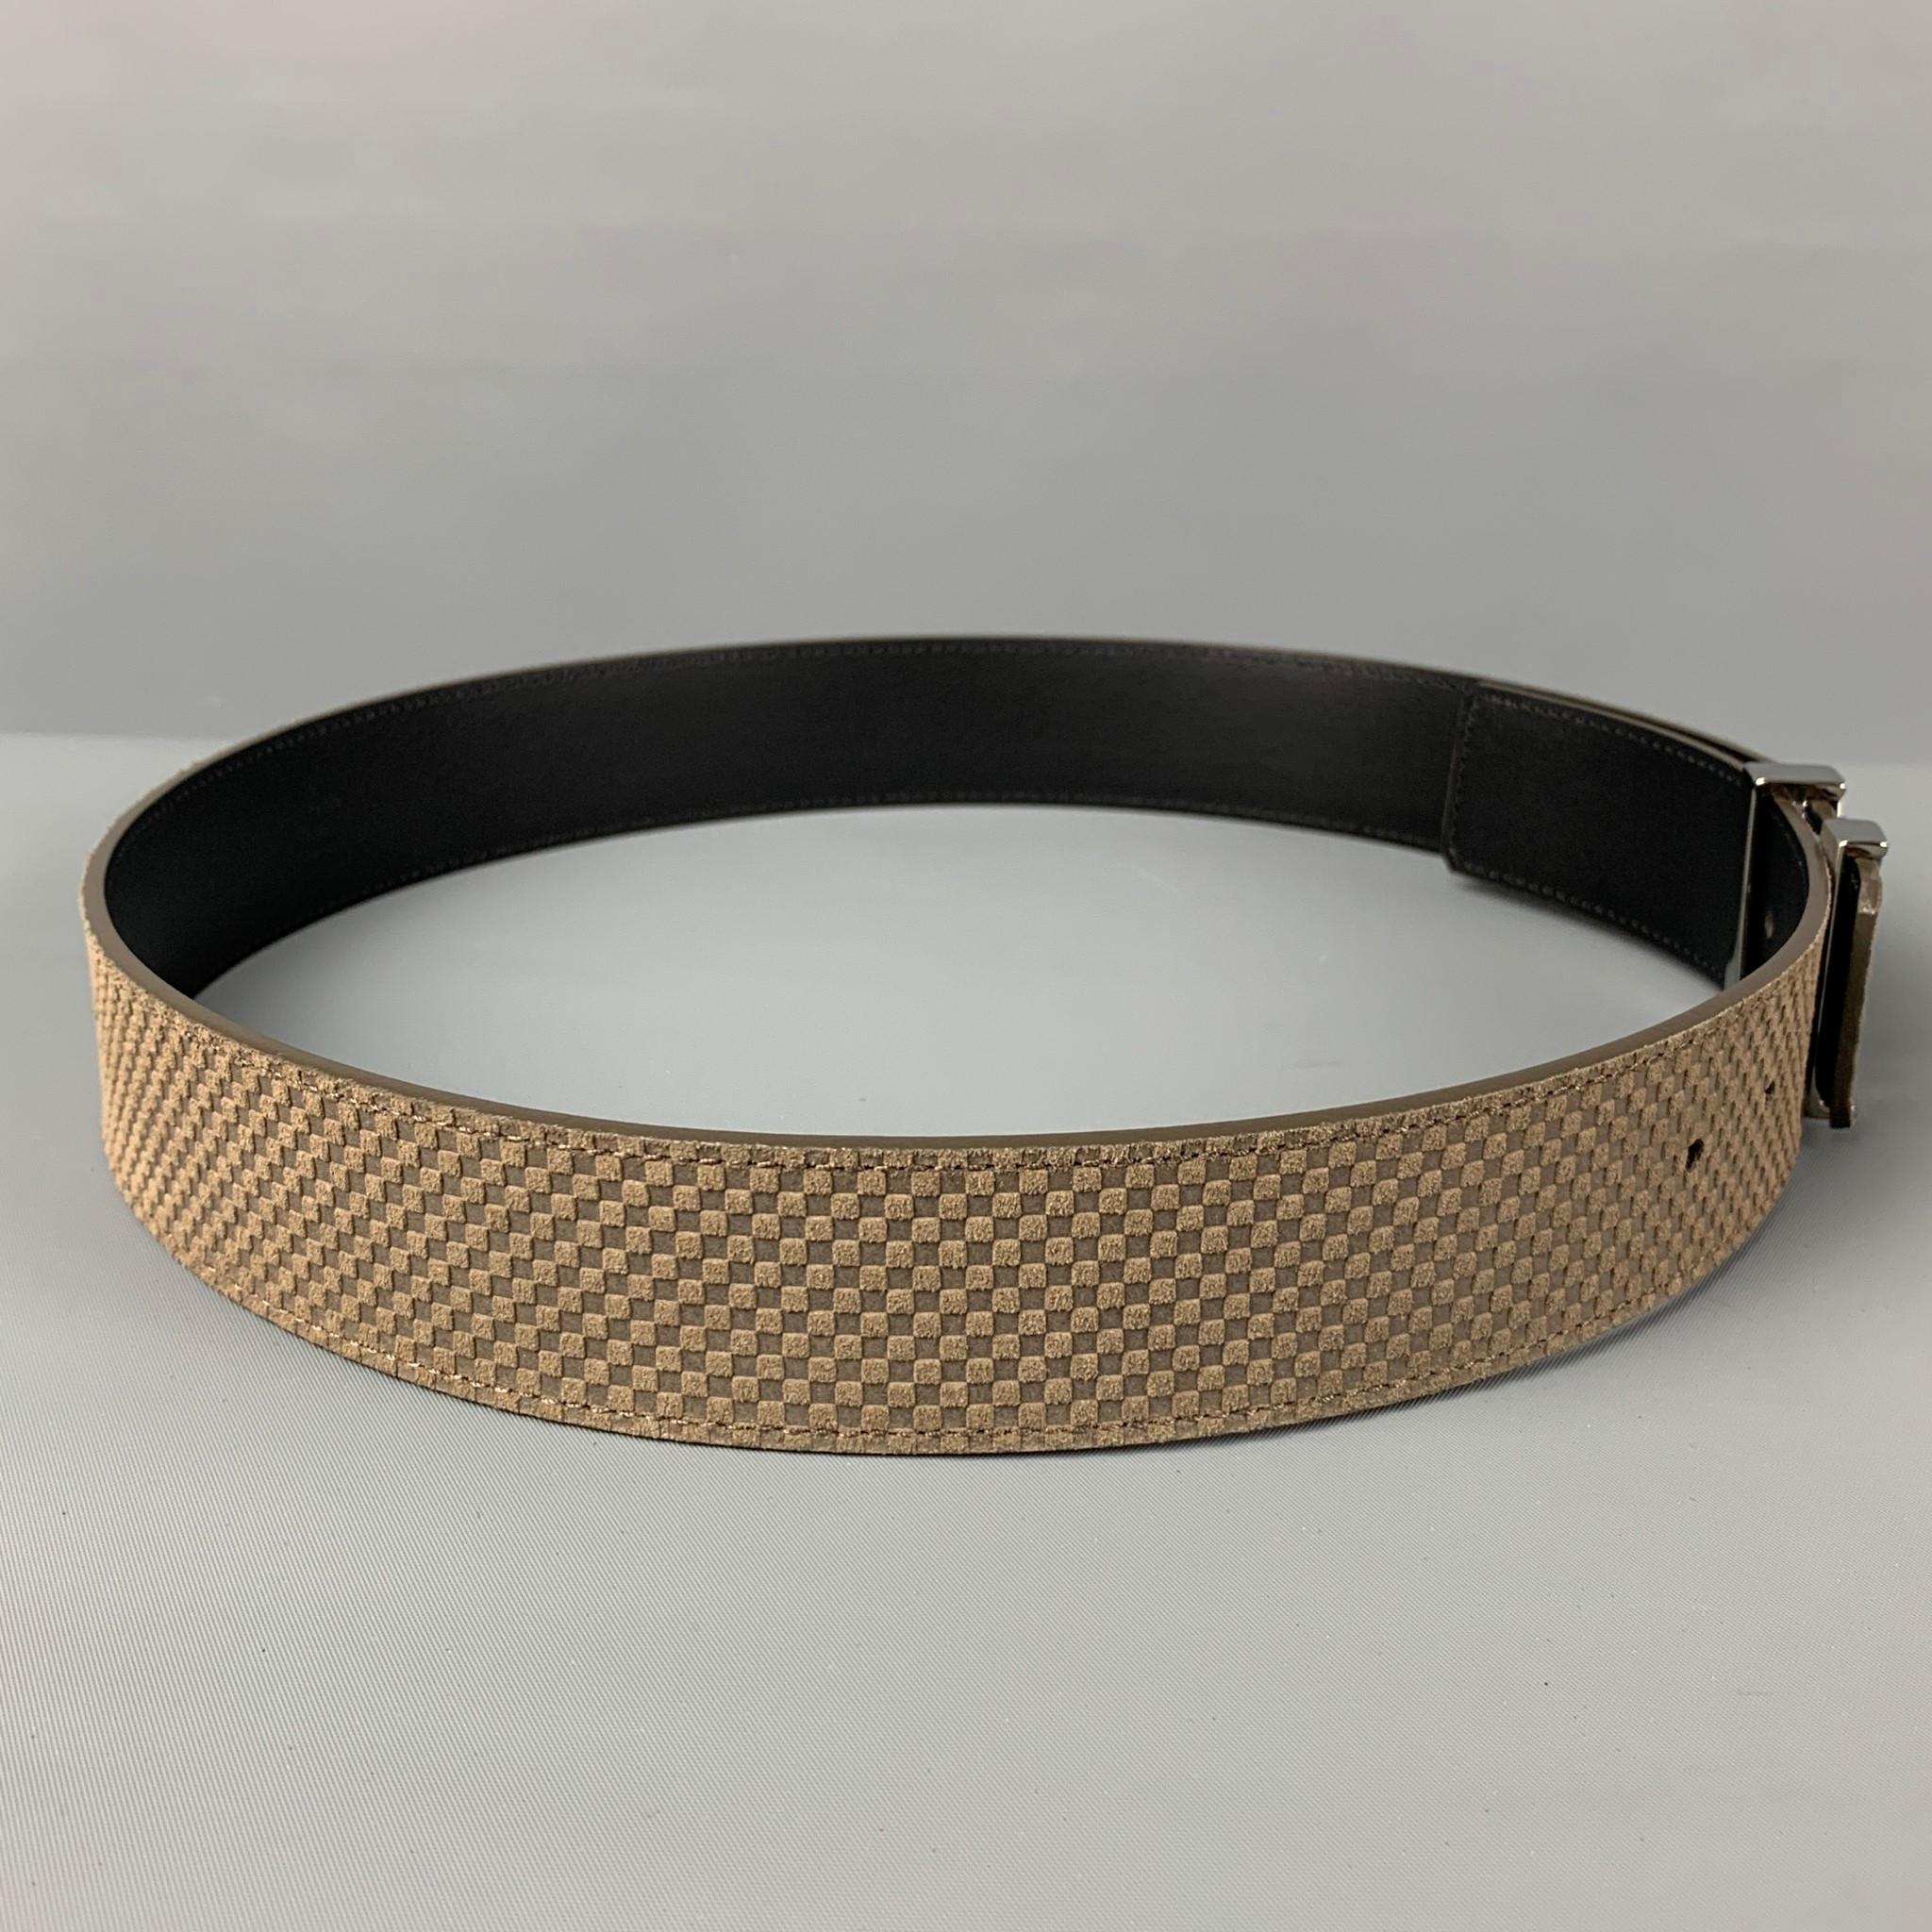 LOUIS VUITTON belt comes in a taupe checkered leather featuring a silver tone logo buckle. Made in Spain. 

Excellent Pre-Owned Condition.
Marked: 85/34 - M9549

Length: 40 in.
Width: 1.5 in.
Fits: 32 in. - 36 in.
Buckle: 1.75 in. 